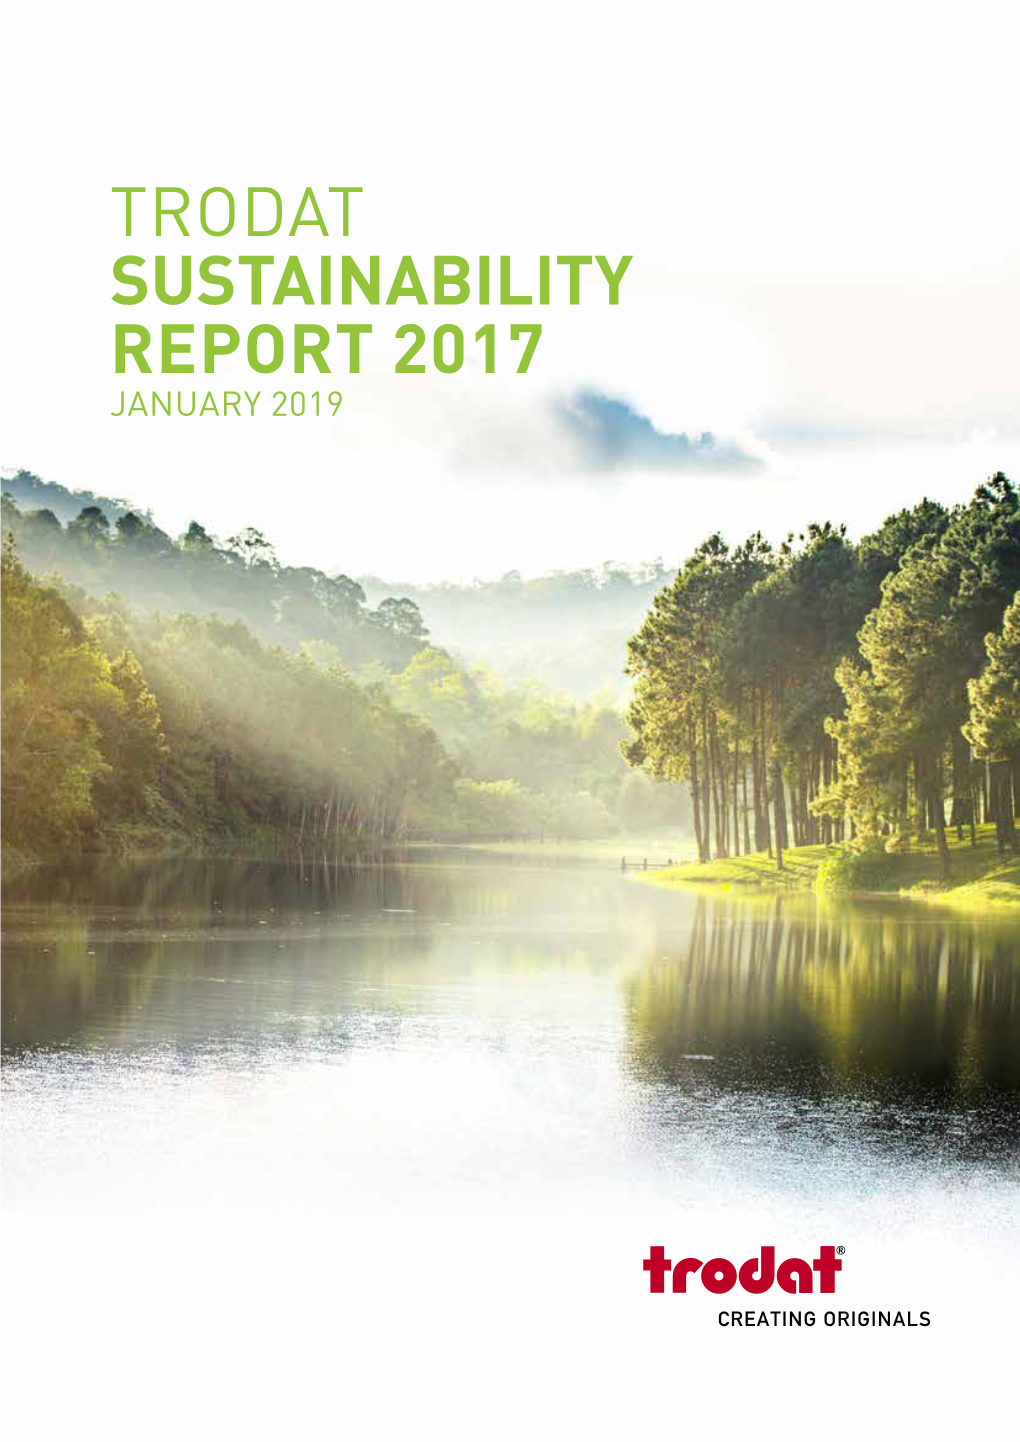 TRODAT SUSTAINABILITY REPORT 2017 JANUARY 2019 TRODAT SUSTAINABILITY REPORT REF 123456 M10C3A18 Printed in Austria TRODAT SUSTAINABILITY REPORT 2017